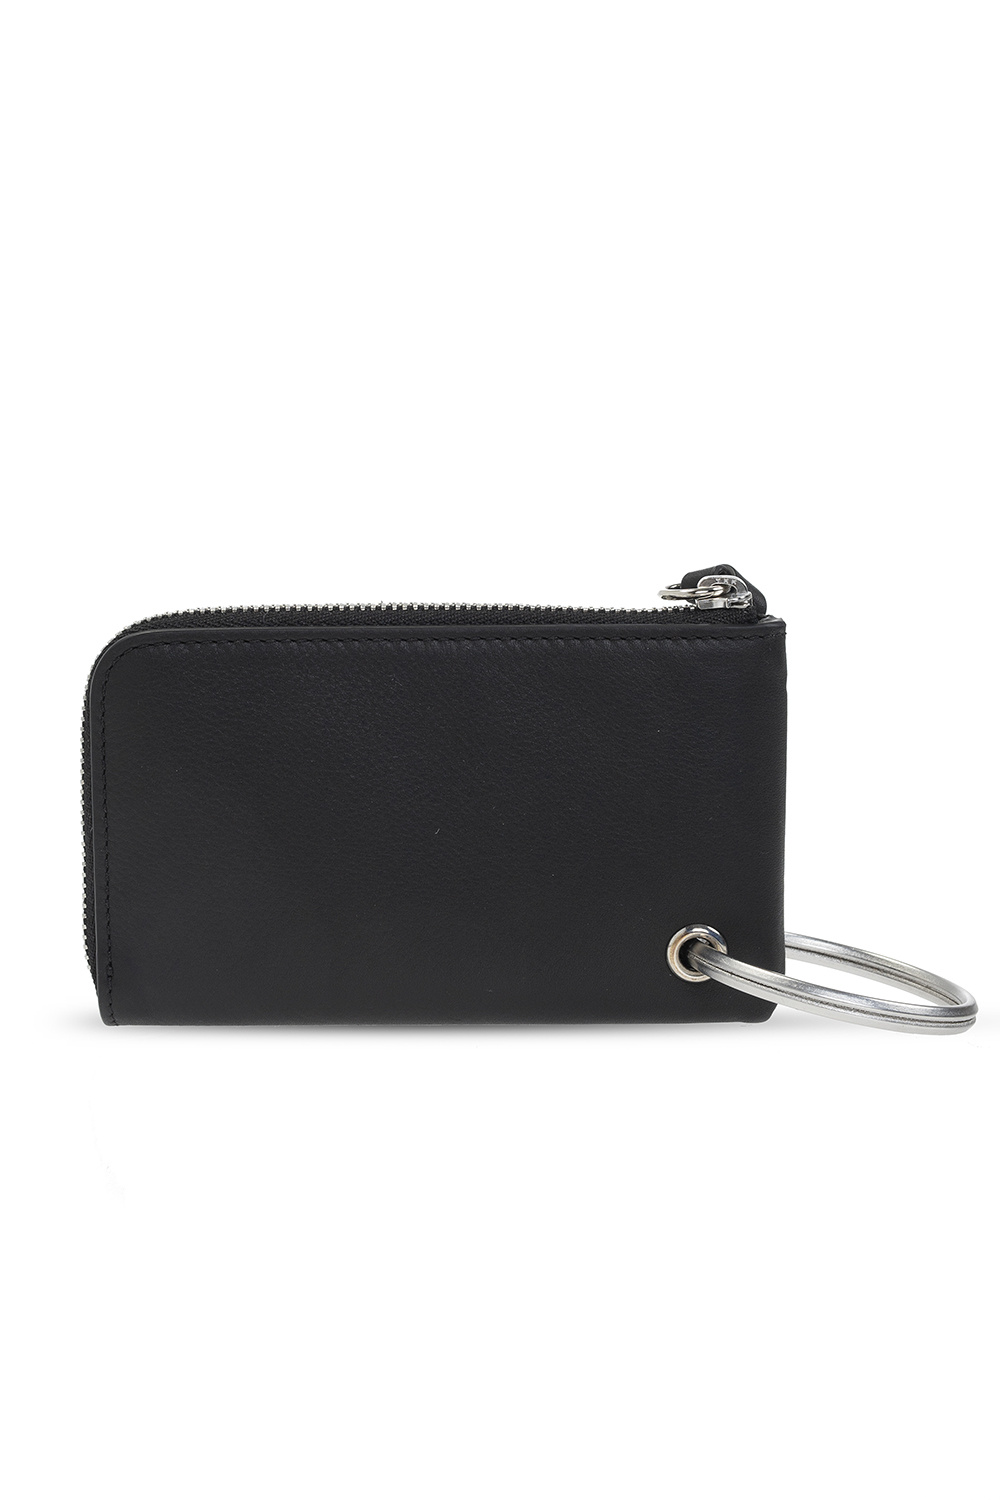 Womens Wallets and cardholders Ann Demeulemeester Wallets and cardholders Ann Demeulemeester Leather White Small Jacky Wallet in Black 